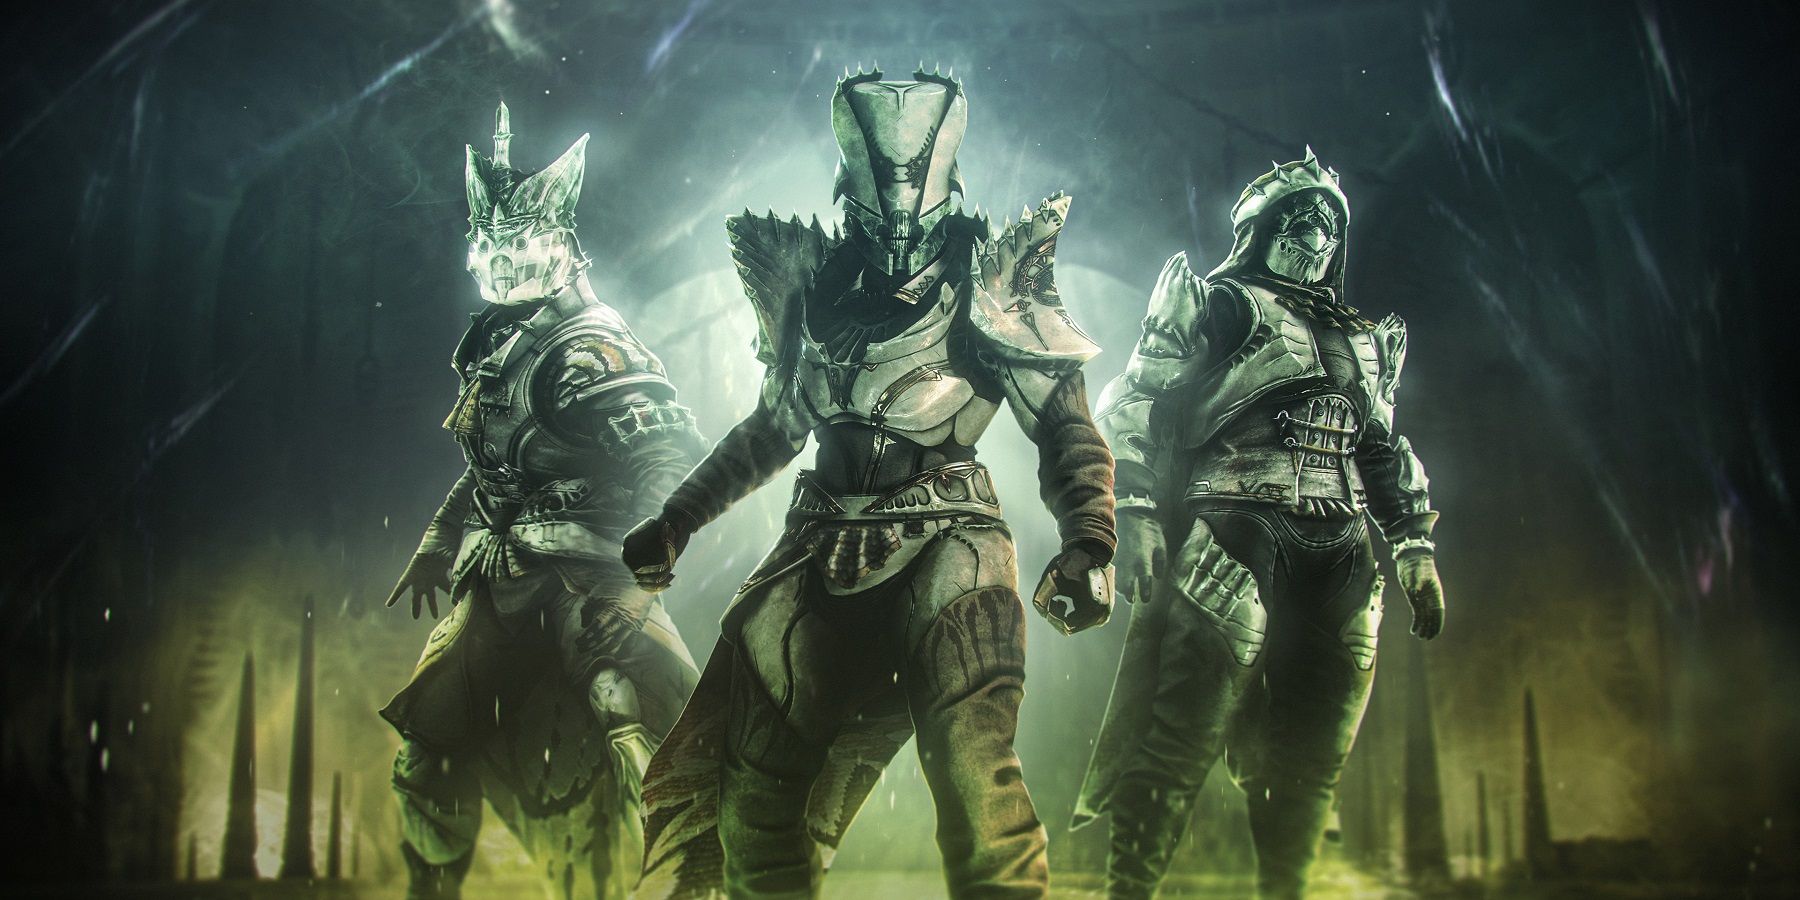 A Destiny 2 's player attempt to showcase the new Season of the Witch armor doesn't end how others may expect.